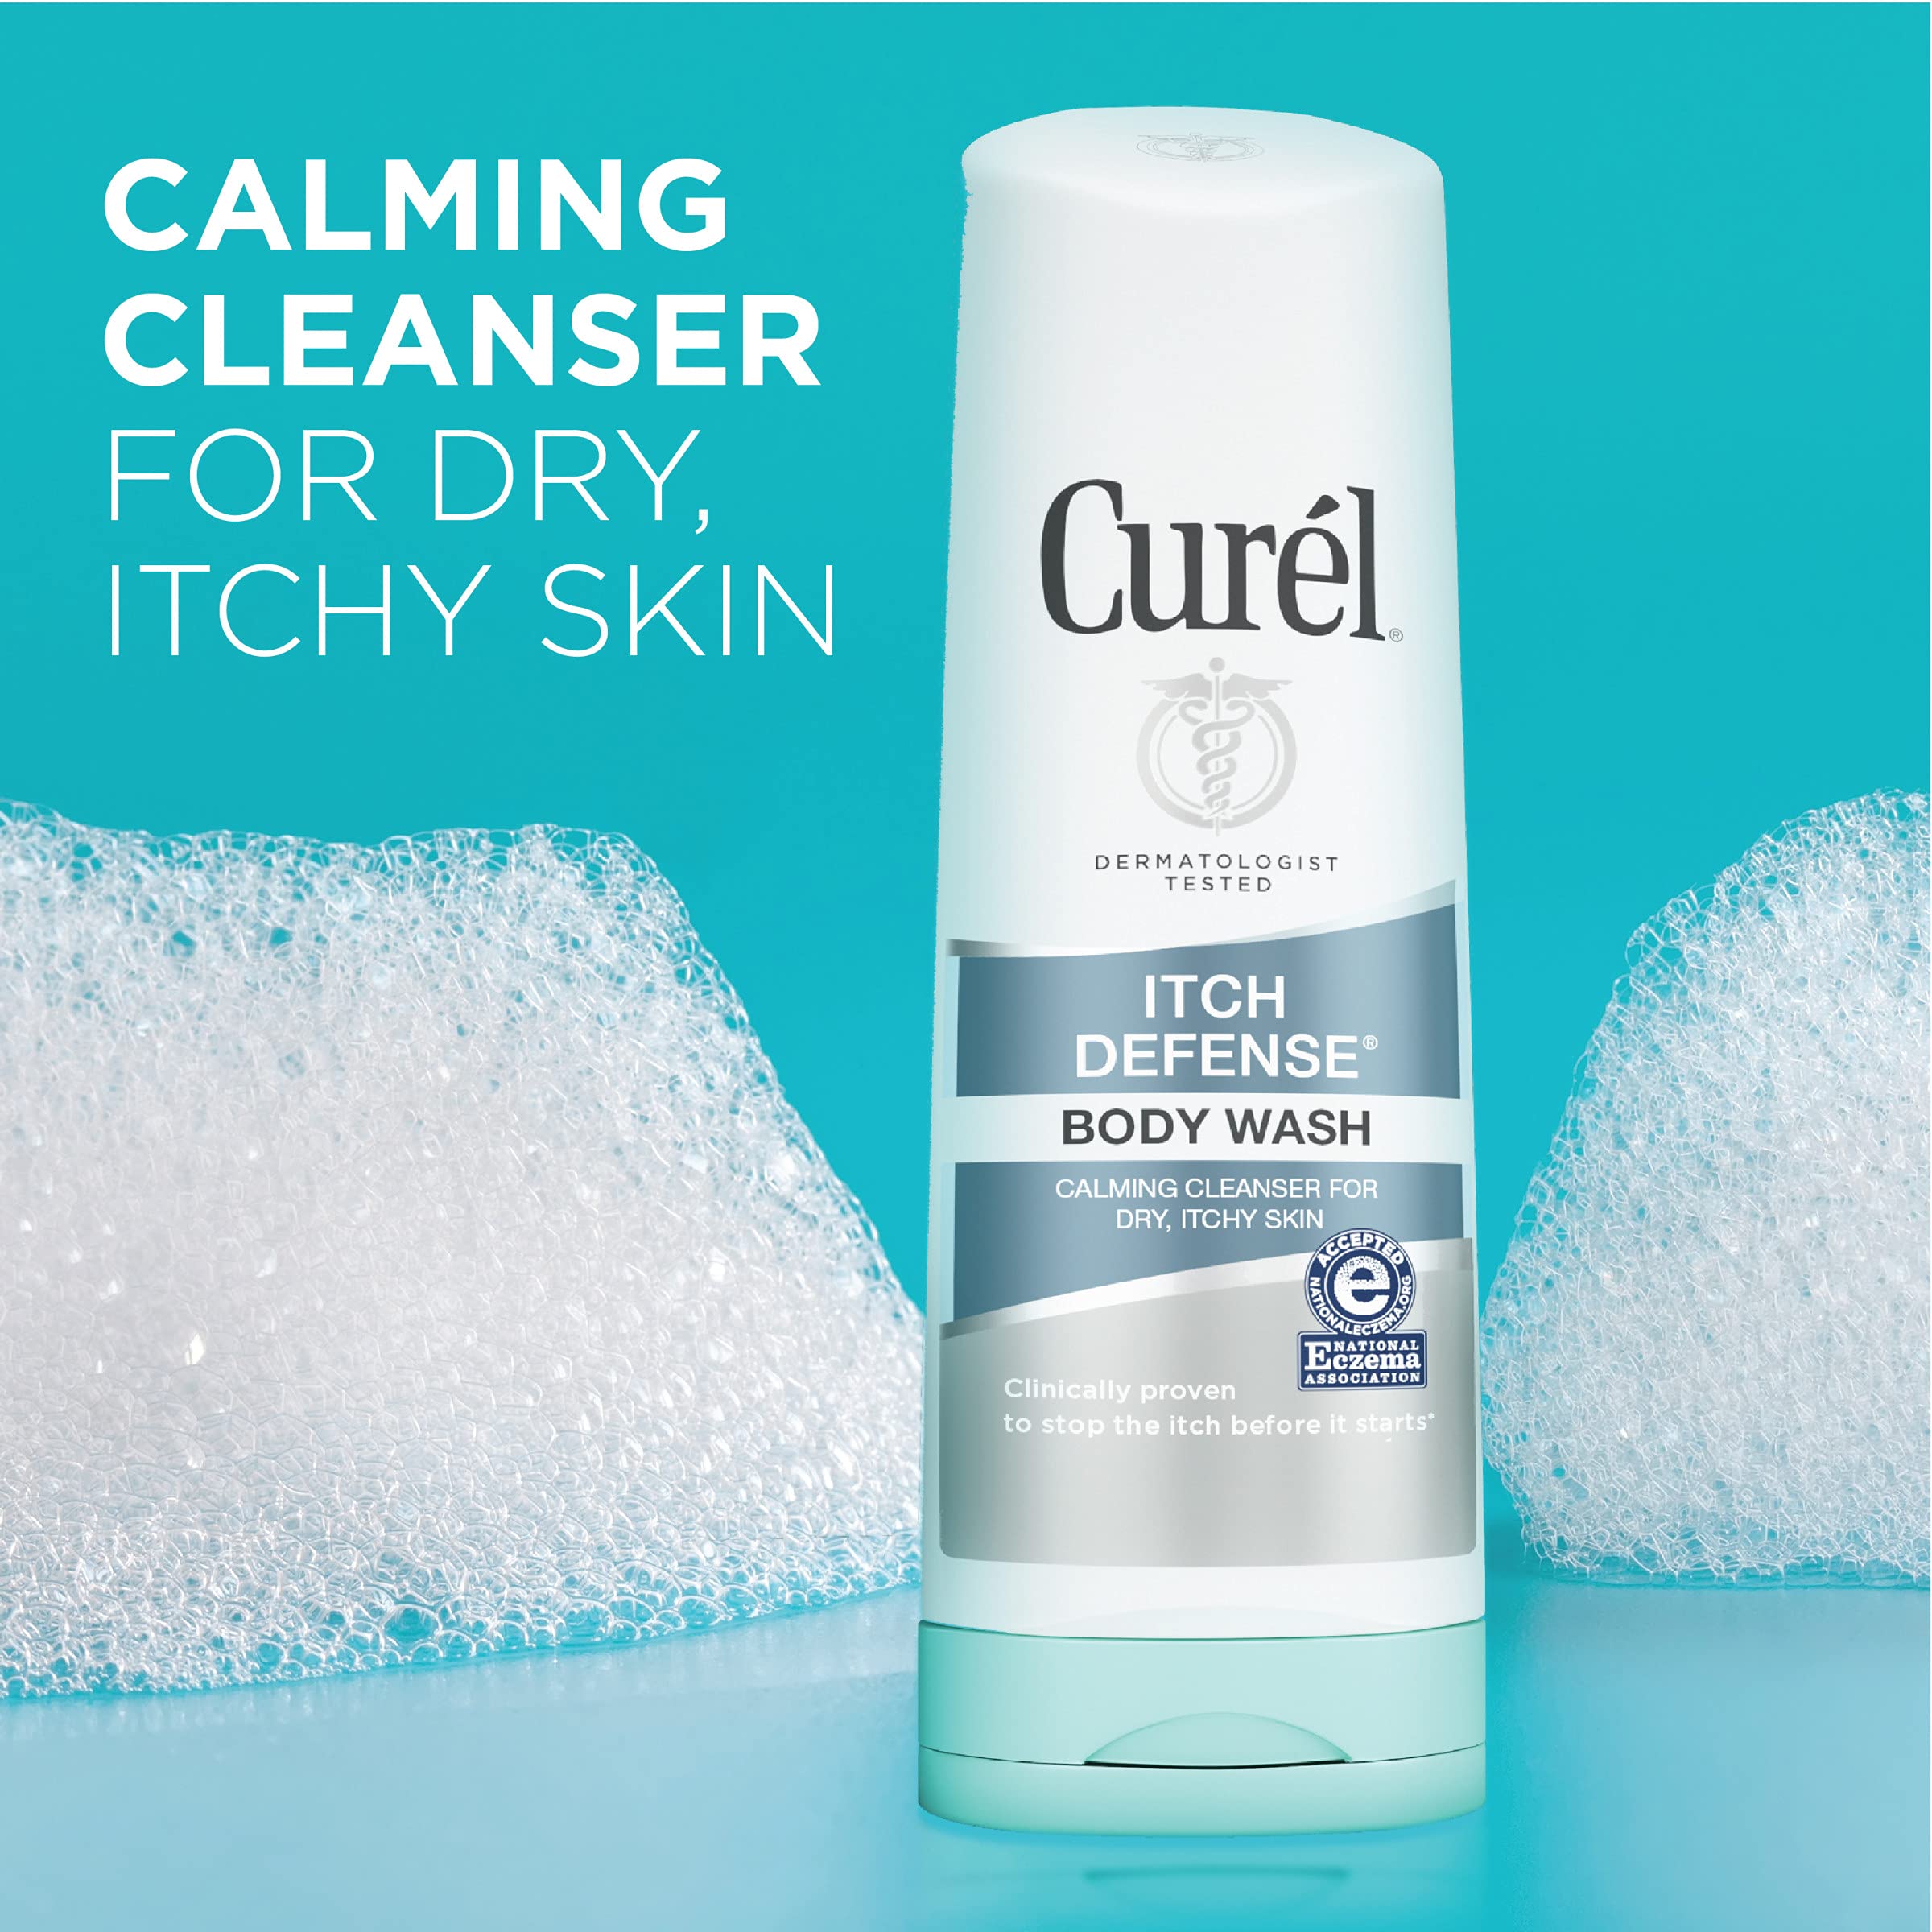 Curel Itch Defense Calming Body Wash, Soap-free Gentle Formula, for Dry, Itchy Skin, with Hydrating Jojoba and Olive Oil, 10 oz (Pack of 3)